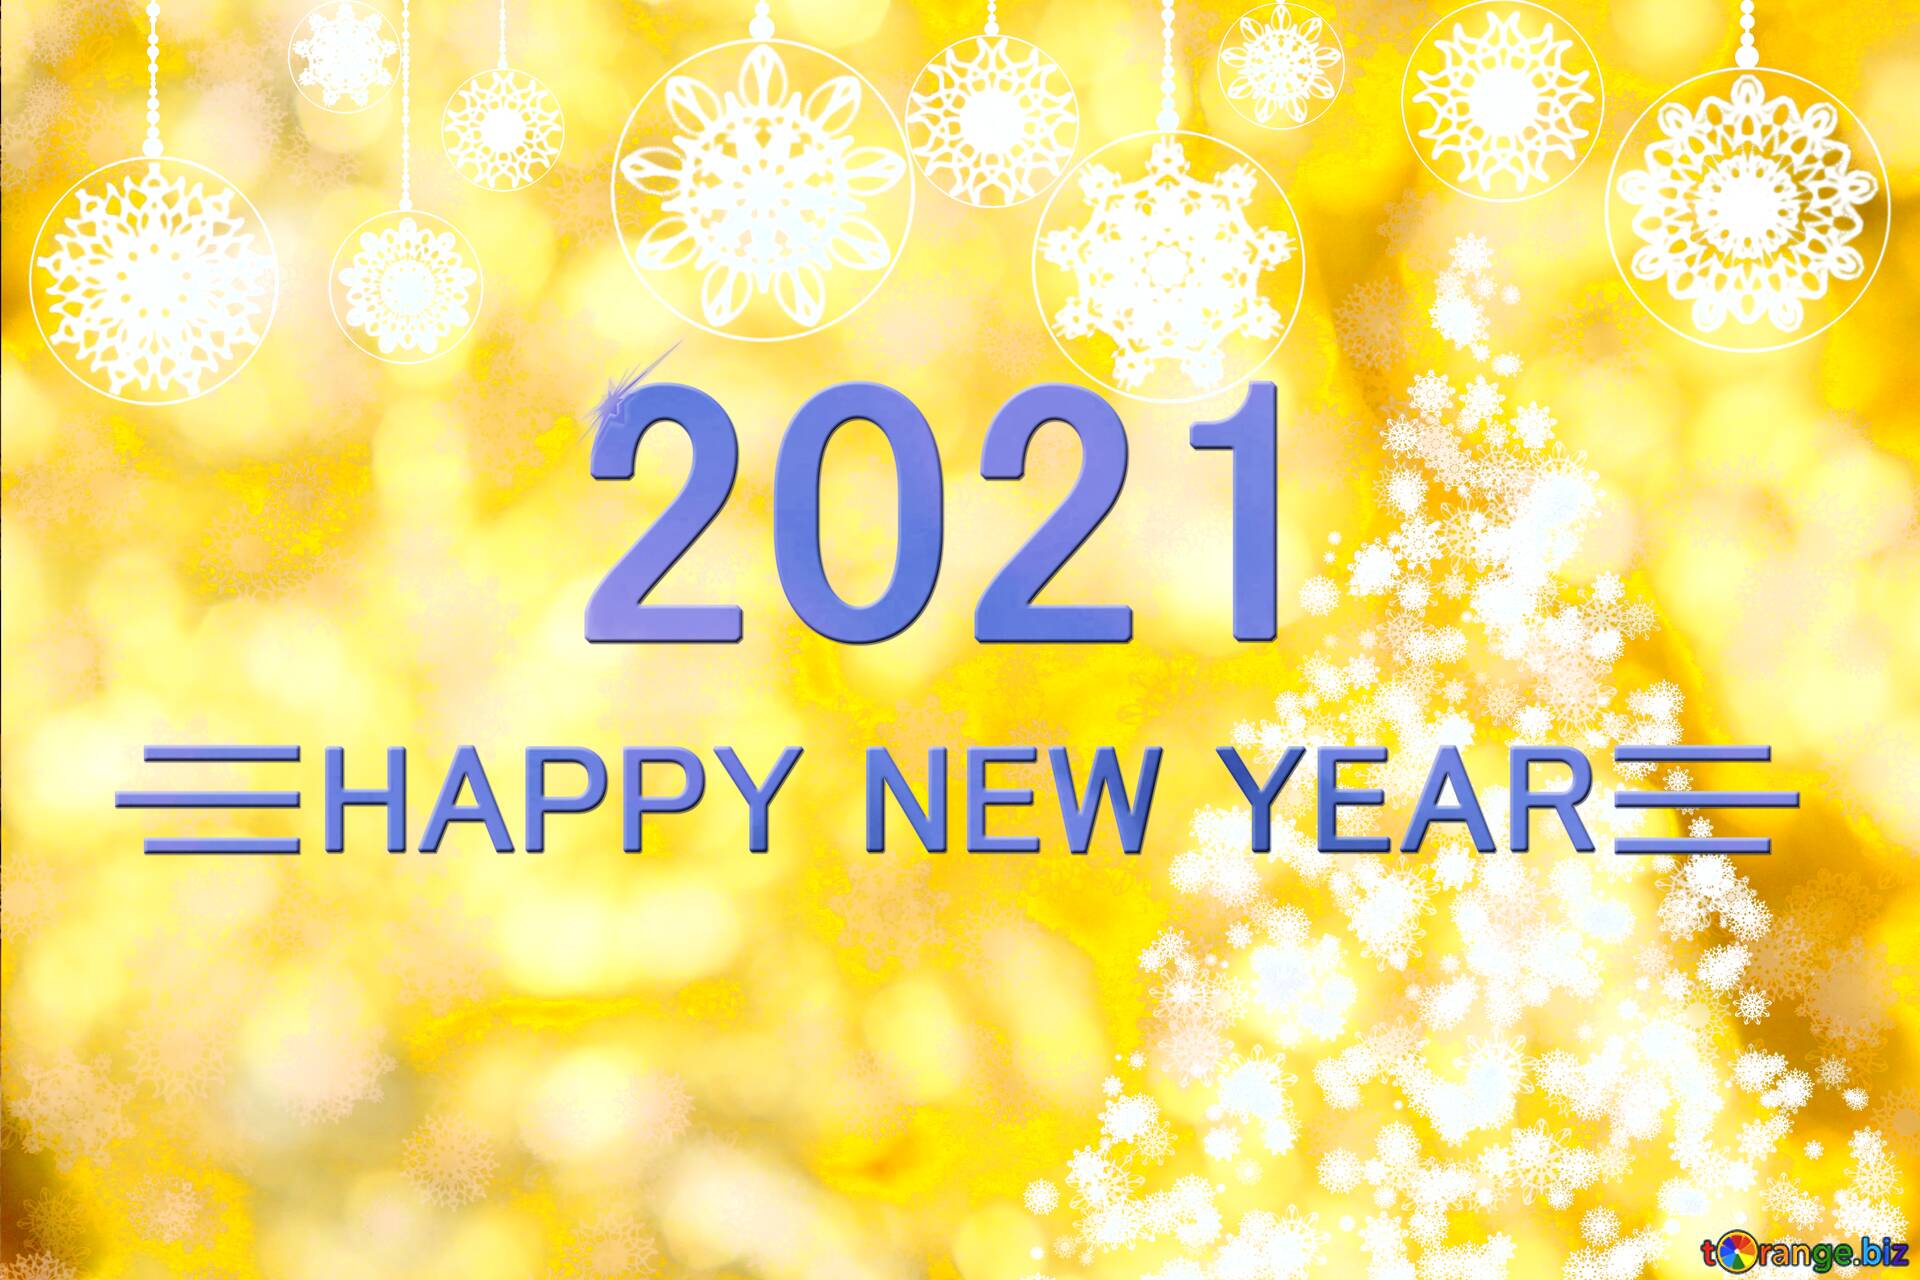 Download Free Picture New Year Golden Background Happy New Year 2021 On CC BY License Free Image Stock TOrange.biz Fx №216266